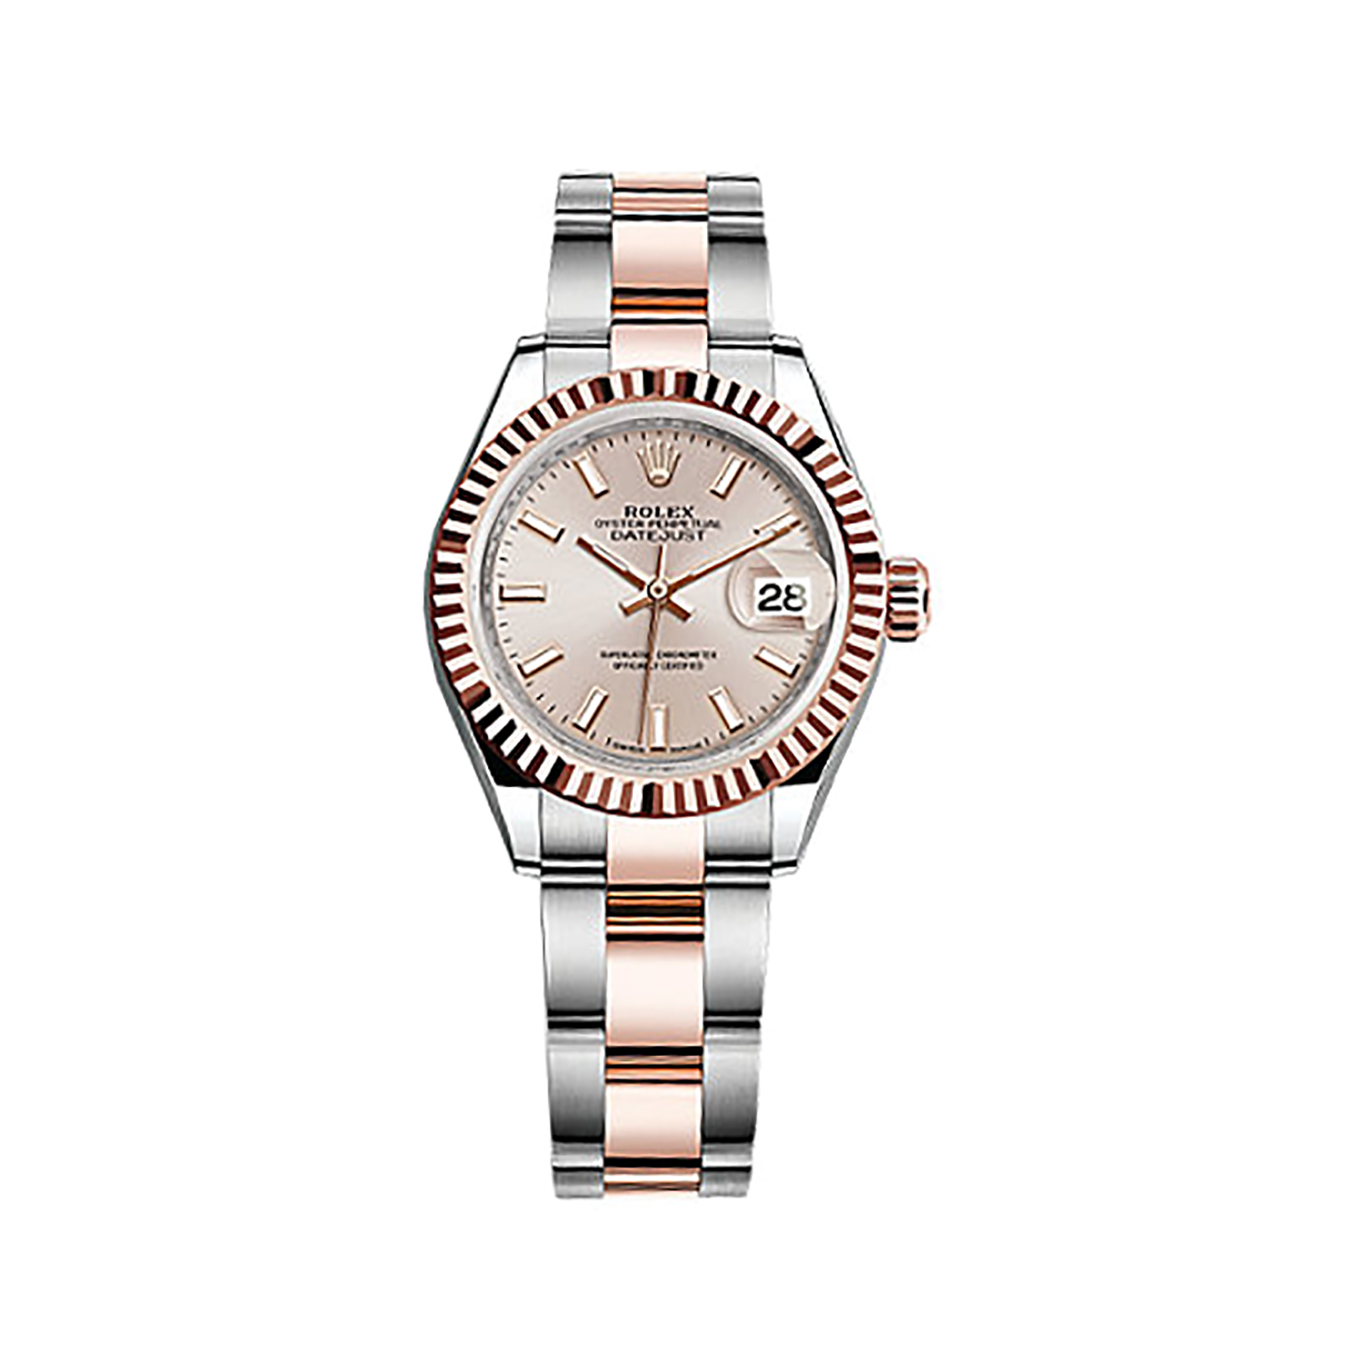 Lady-Datejust 28 279171 Rose Gold & Stainless Steel Watch (Sundust)